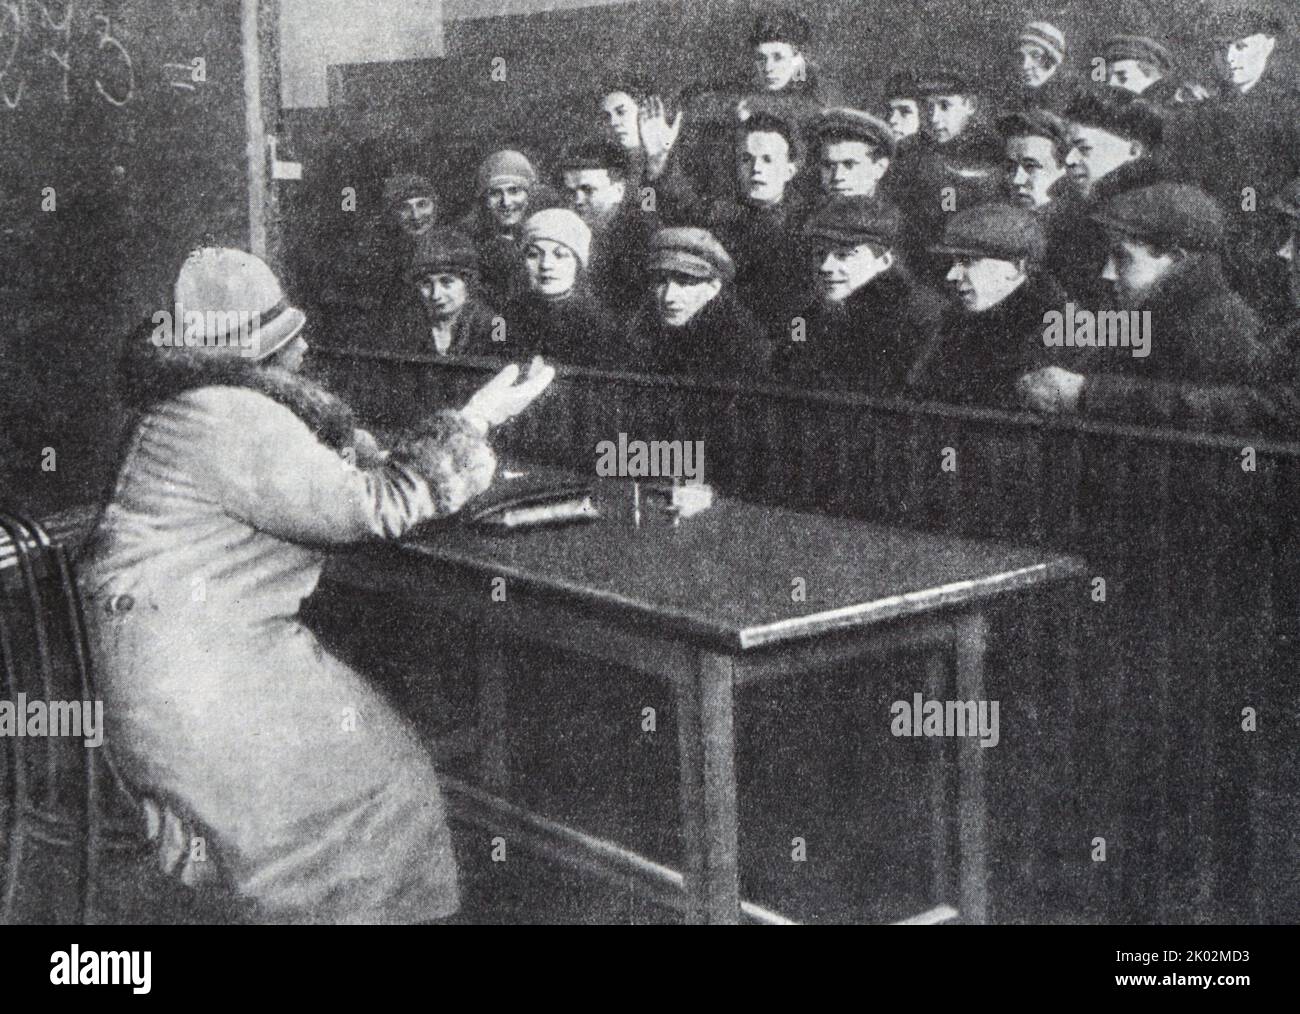 Classes at the working faculty of them. M.N. Pokrovsky at Moscow State University. 1920. (Photo). Stock Photo